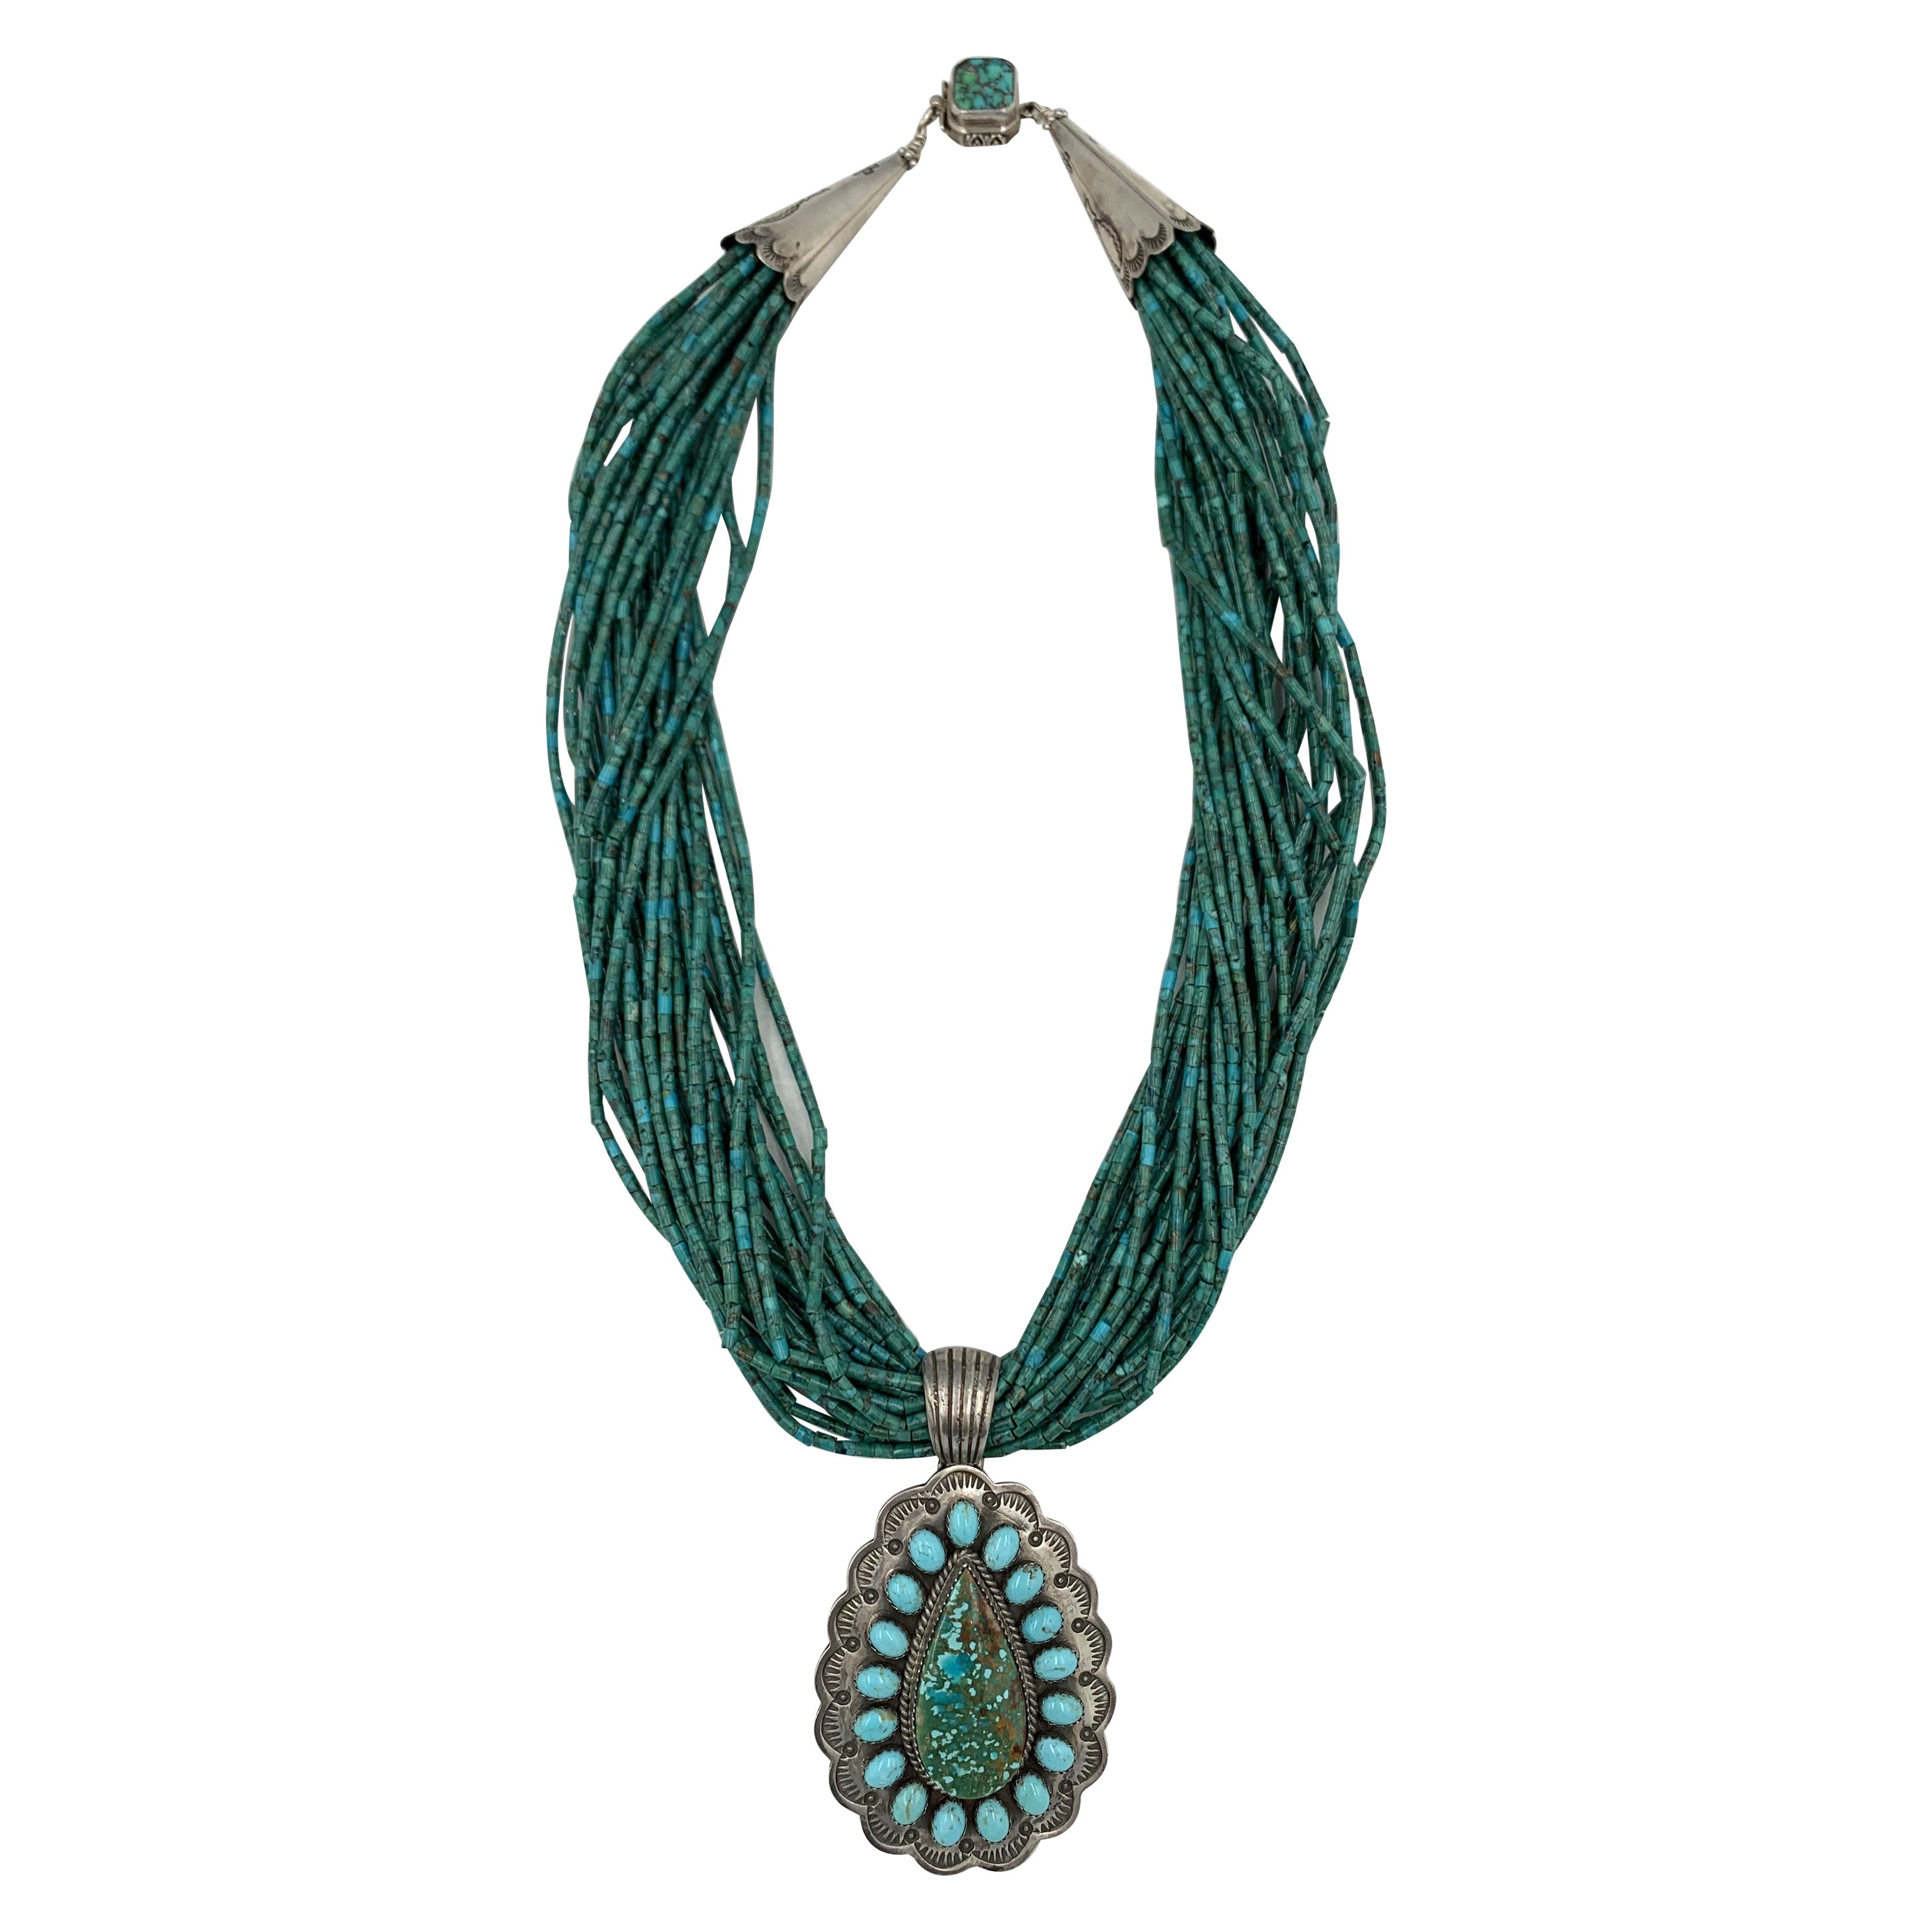 Turquoise Beaded Necklace with Turquoise Pendant